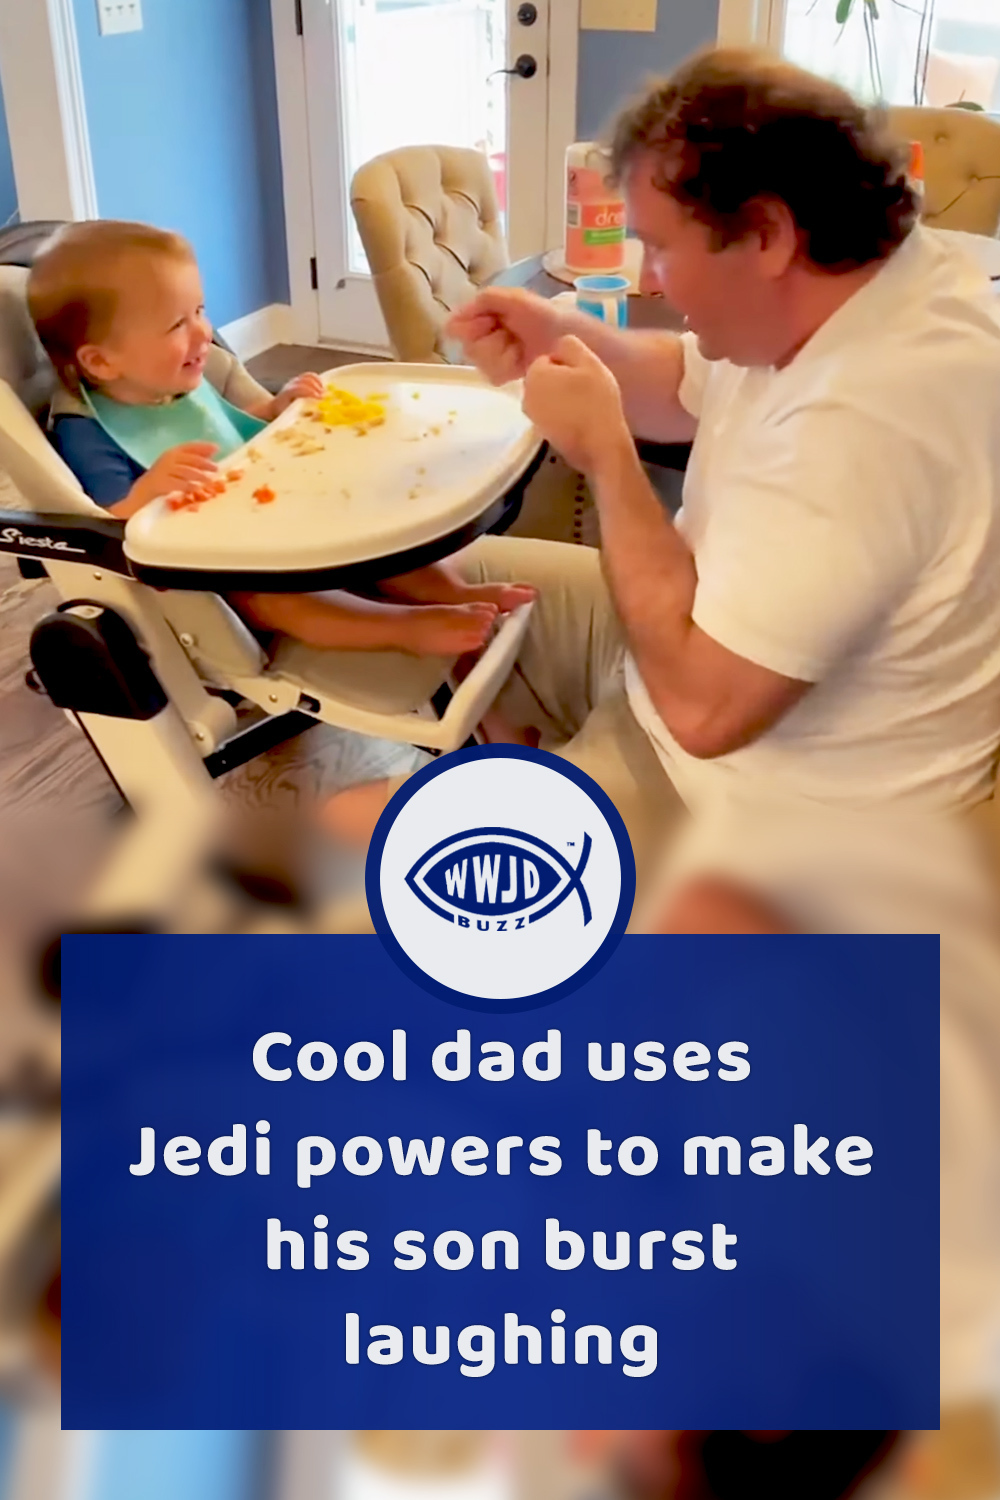 Cool dad uses Jedi powers to make his son burst laughing